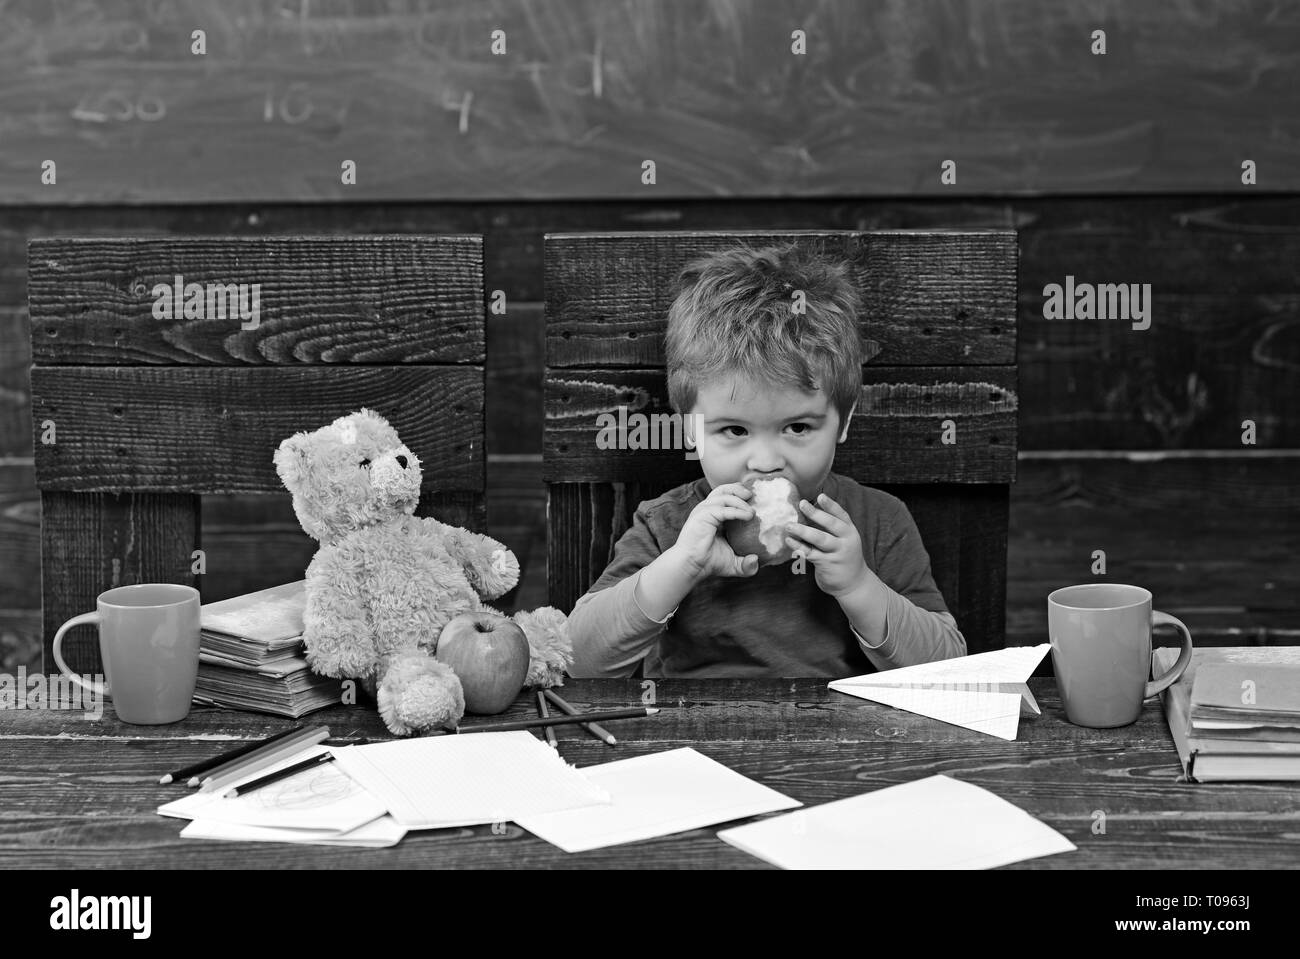 School break. Hungry kid biting apple in classroom. Small boy playing with paper plane and teddy bear Stock Photo